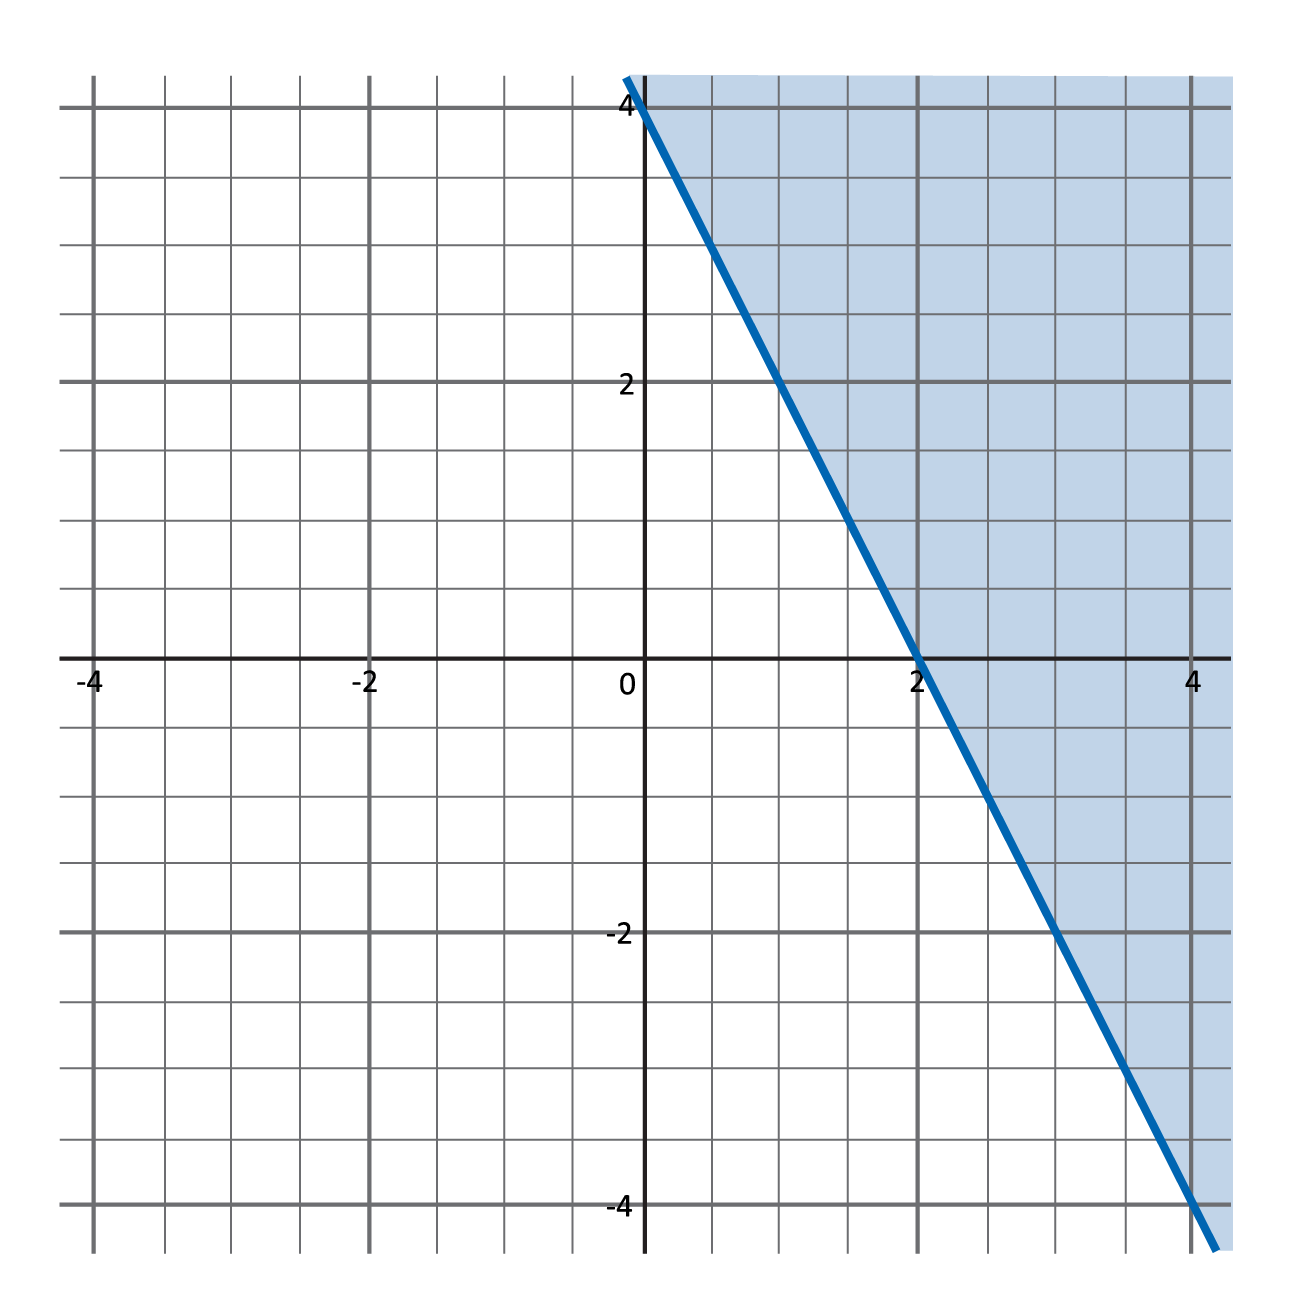 solid line passing through the points (0, 4) and (2, 0), above line is shaded blue